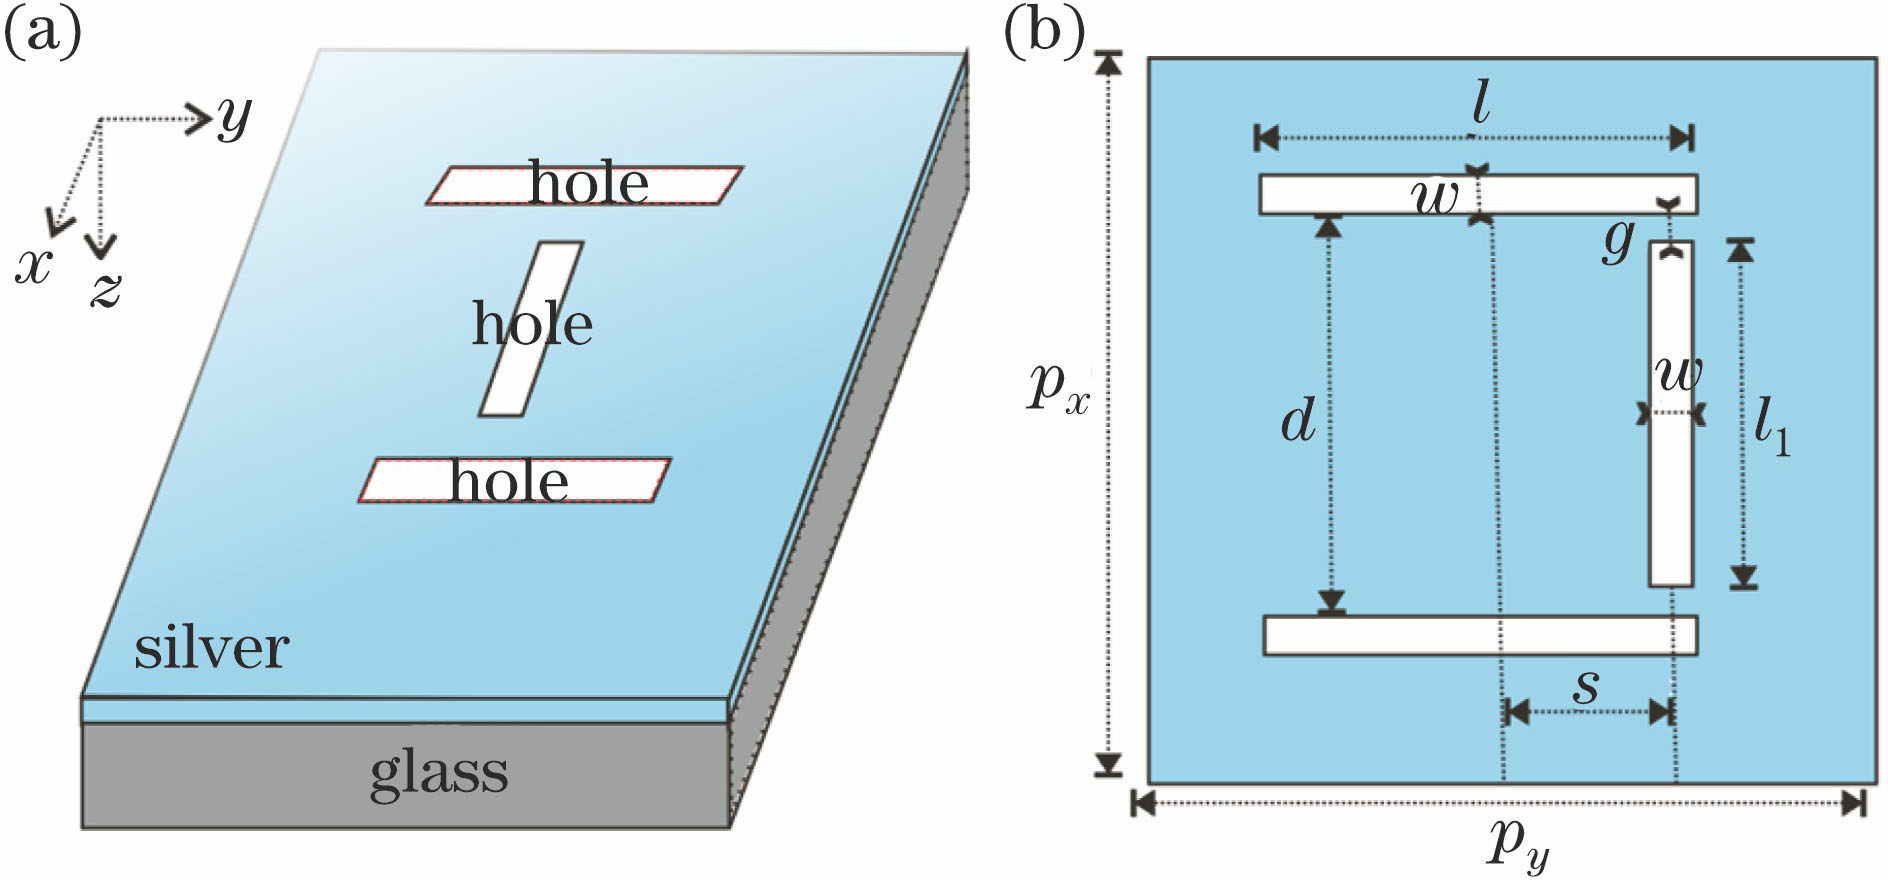 Schematic of structure model. (a) Three-dimensional stereogram; (b) two-dimensional plane picture